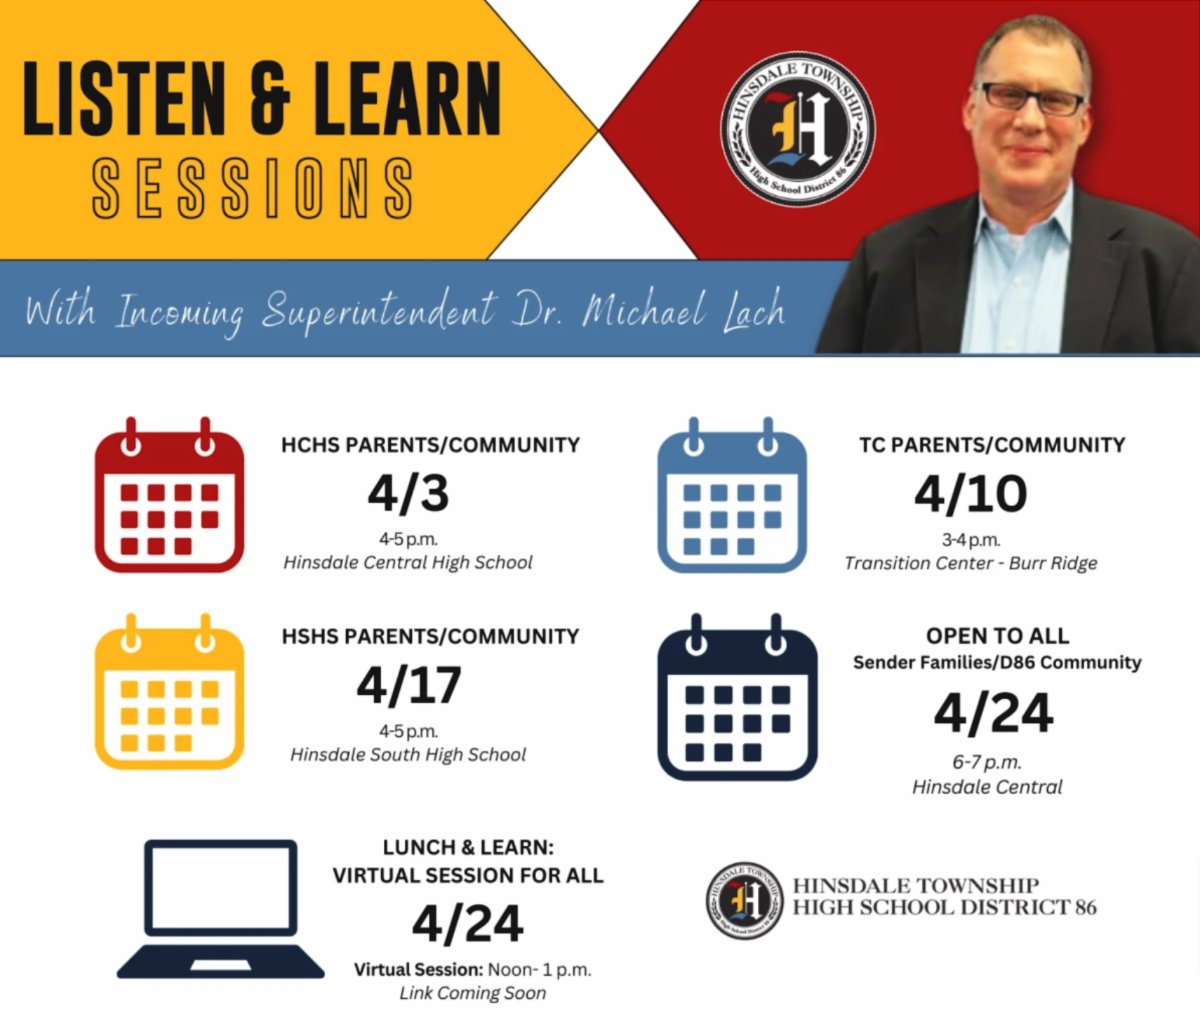 Listen and Learn Session with Dr. Micheal Lach will be held at Hinsdale Central High School tonight (4/24) at 6:00 p.m. There will also be a Virtual Listen & Learn Session: hinsdale86-org.zoom.us/j/83674801029 Session to be held from Noon-1 p.m. on Wednesday, April 24